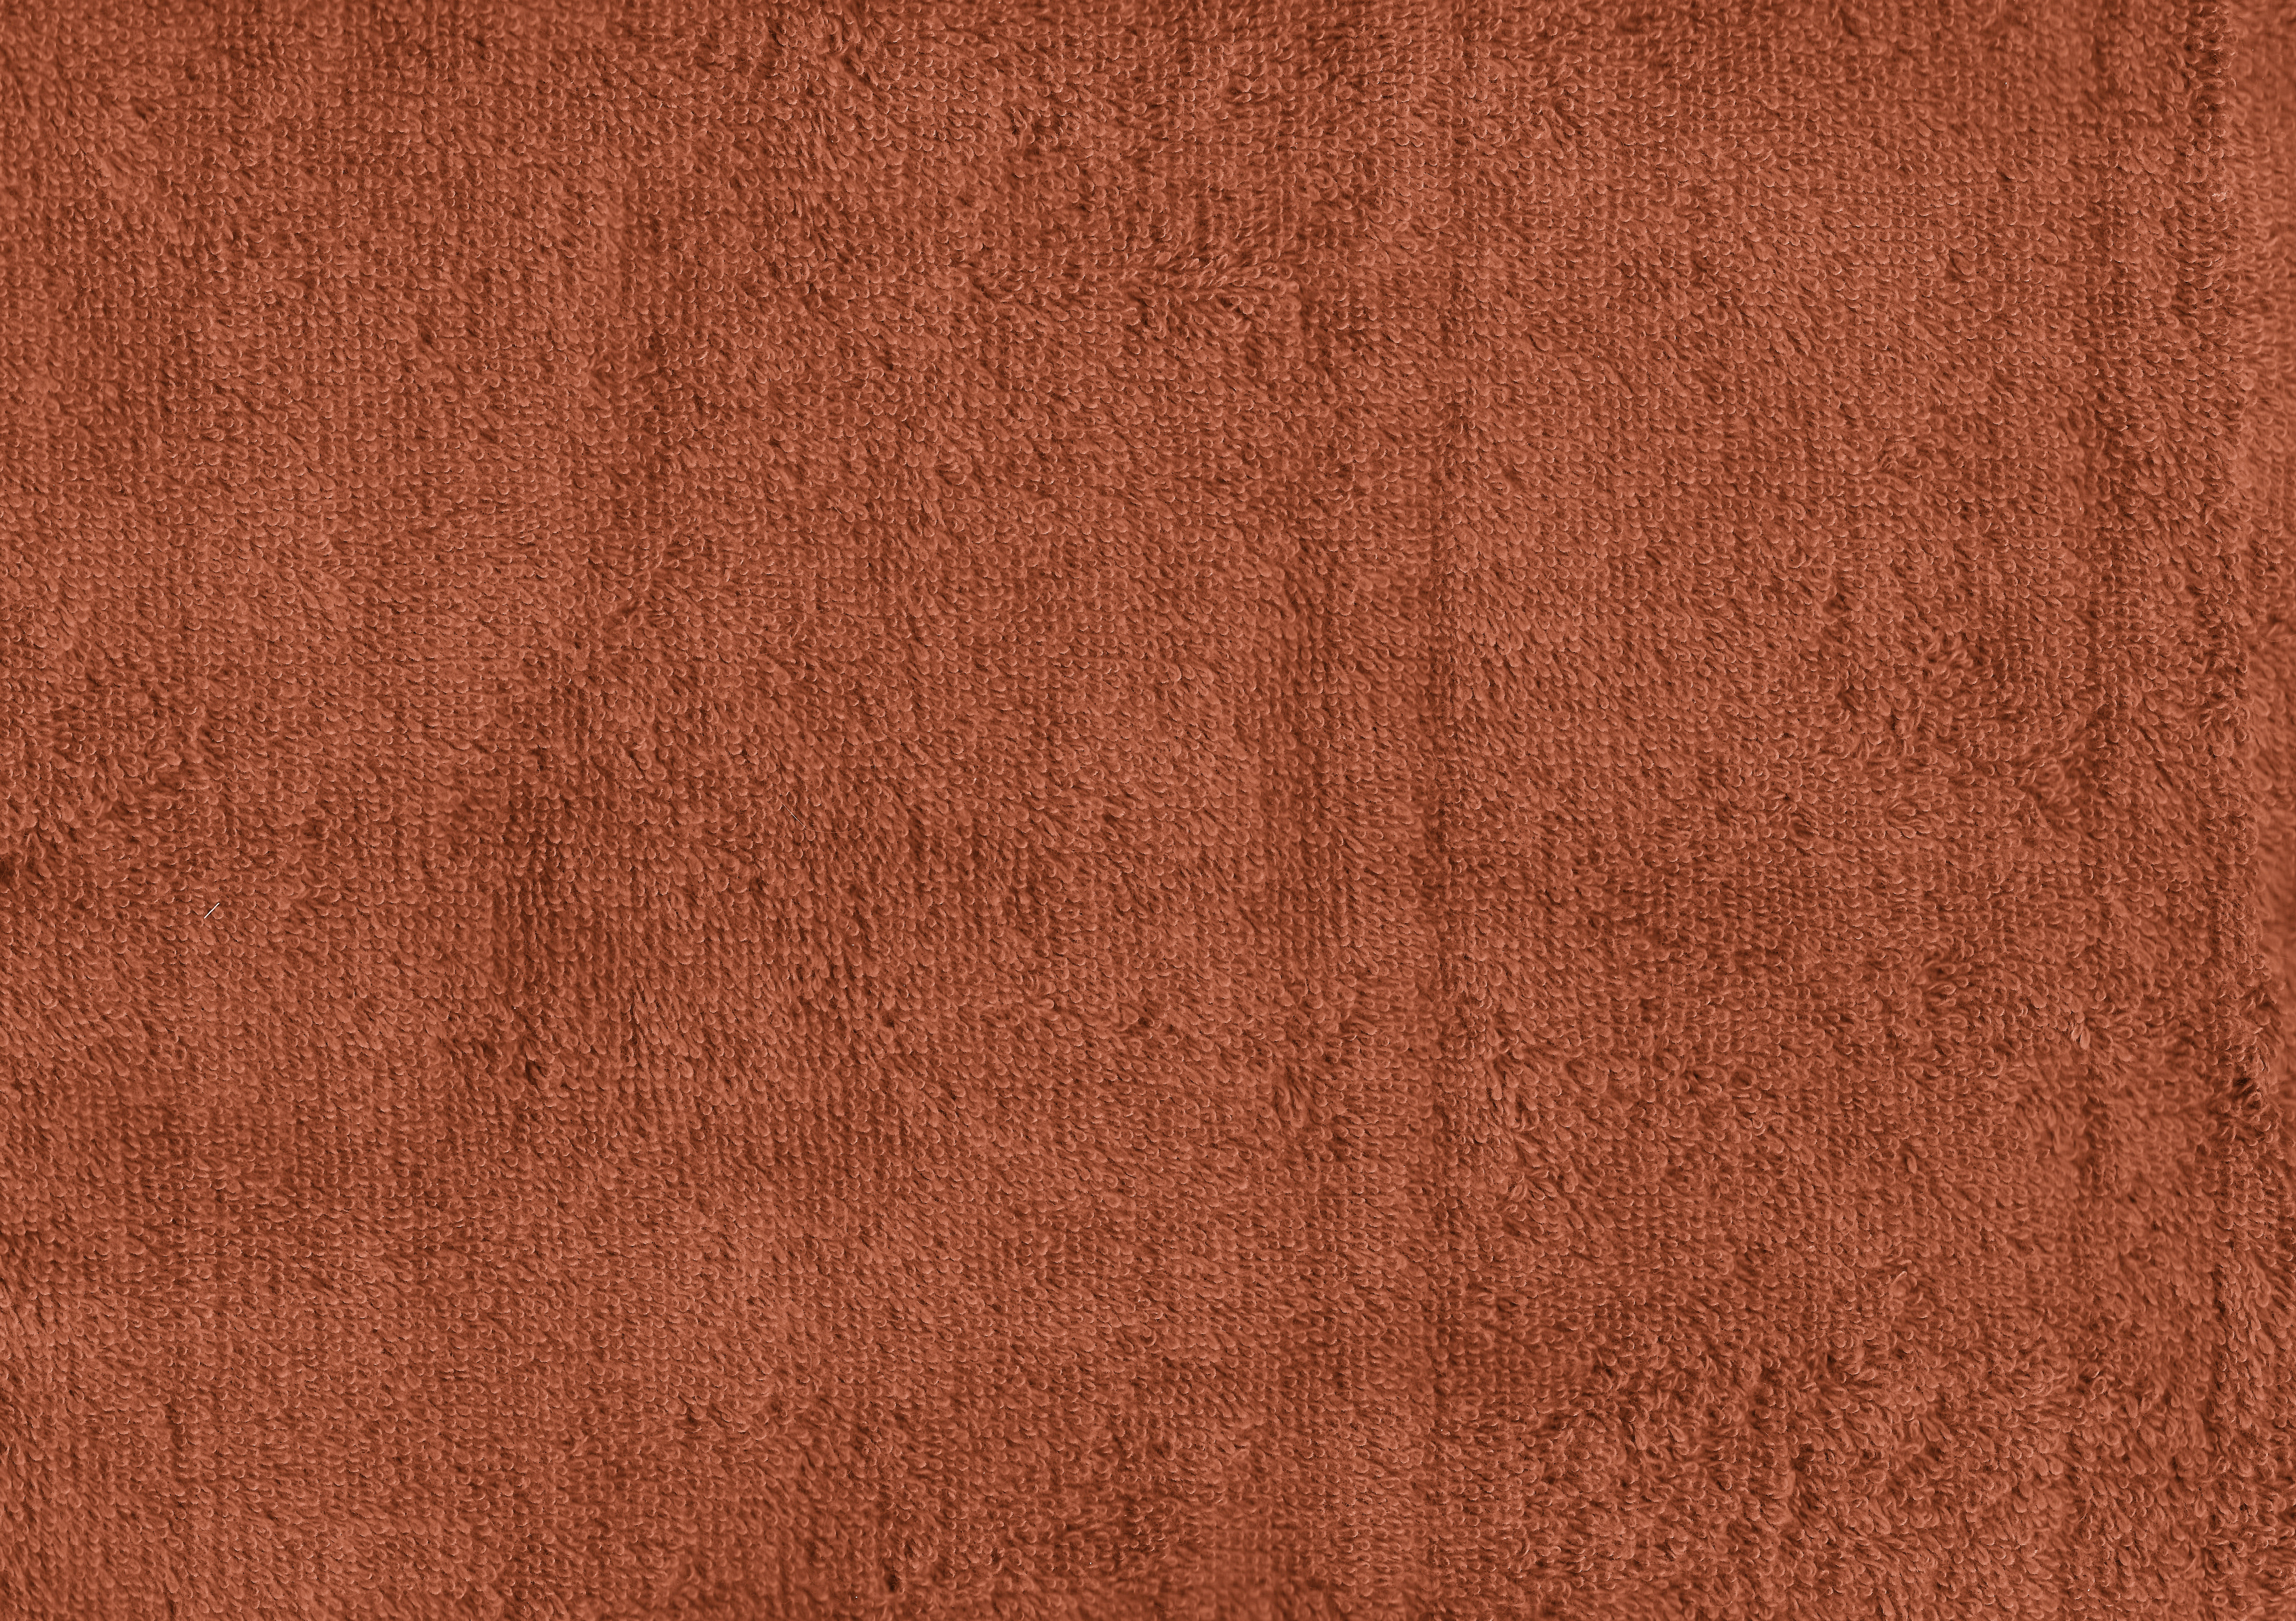 Rust Terry Cloth Towel Texture Picture | Free Photograph | Photos ...